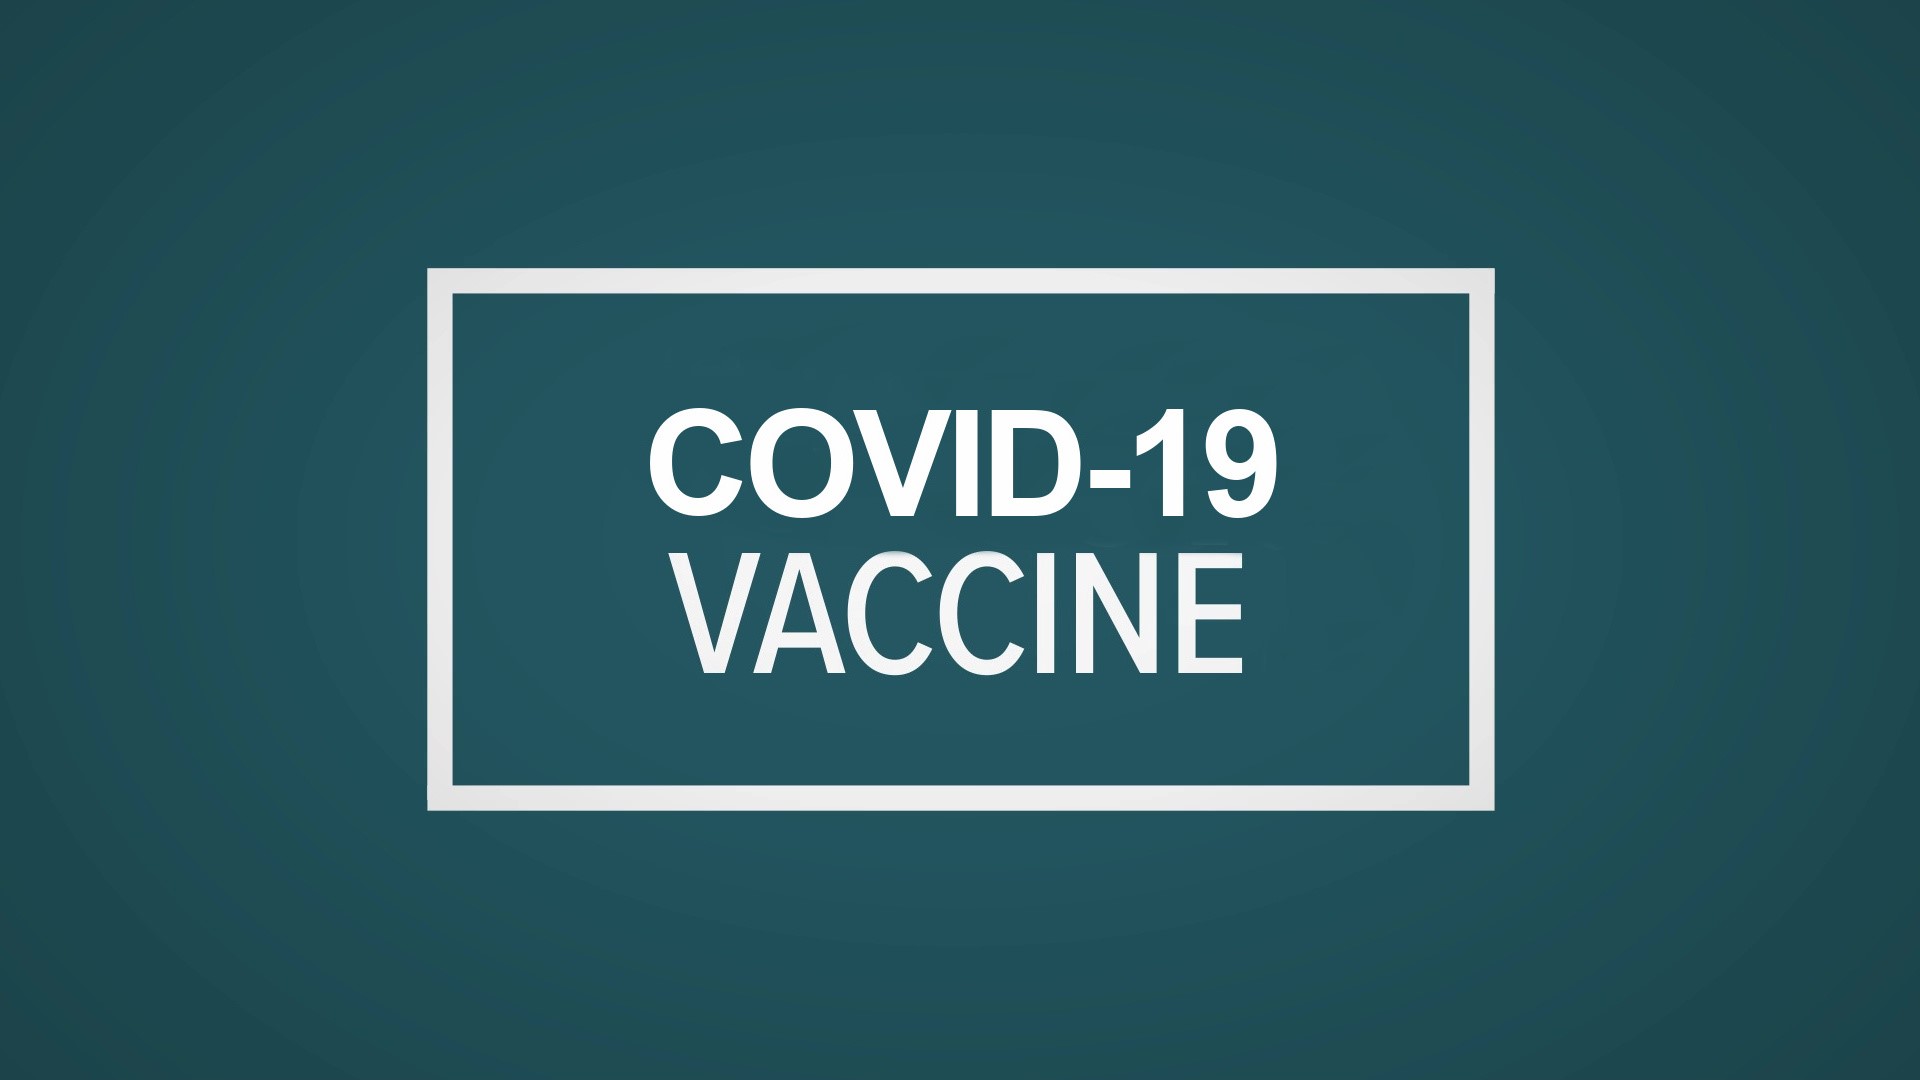 The Department of Health said its updated coronavirus vaccine plan tracks recommendations from the federal government.